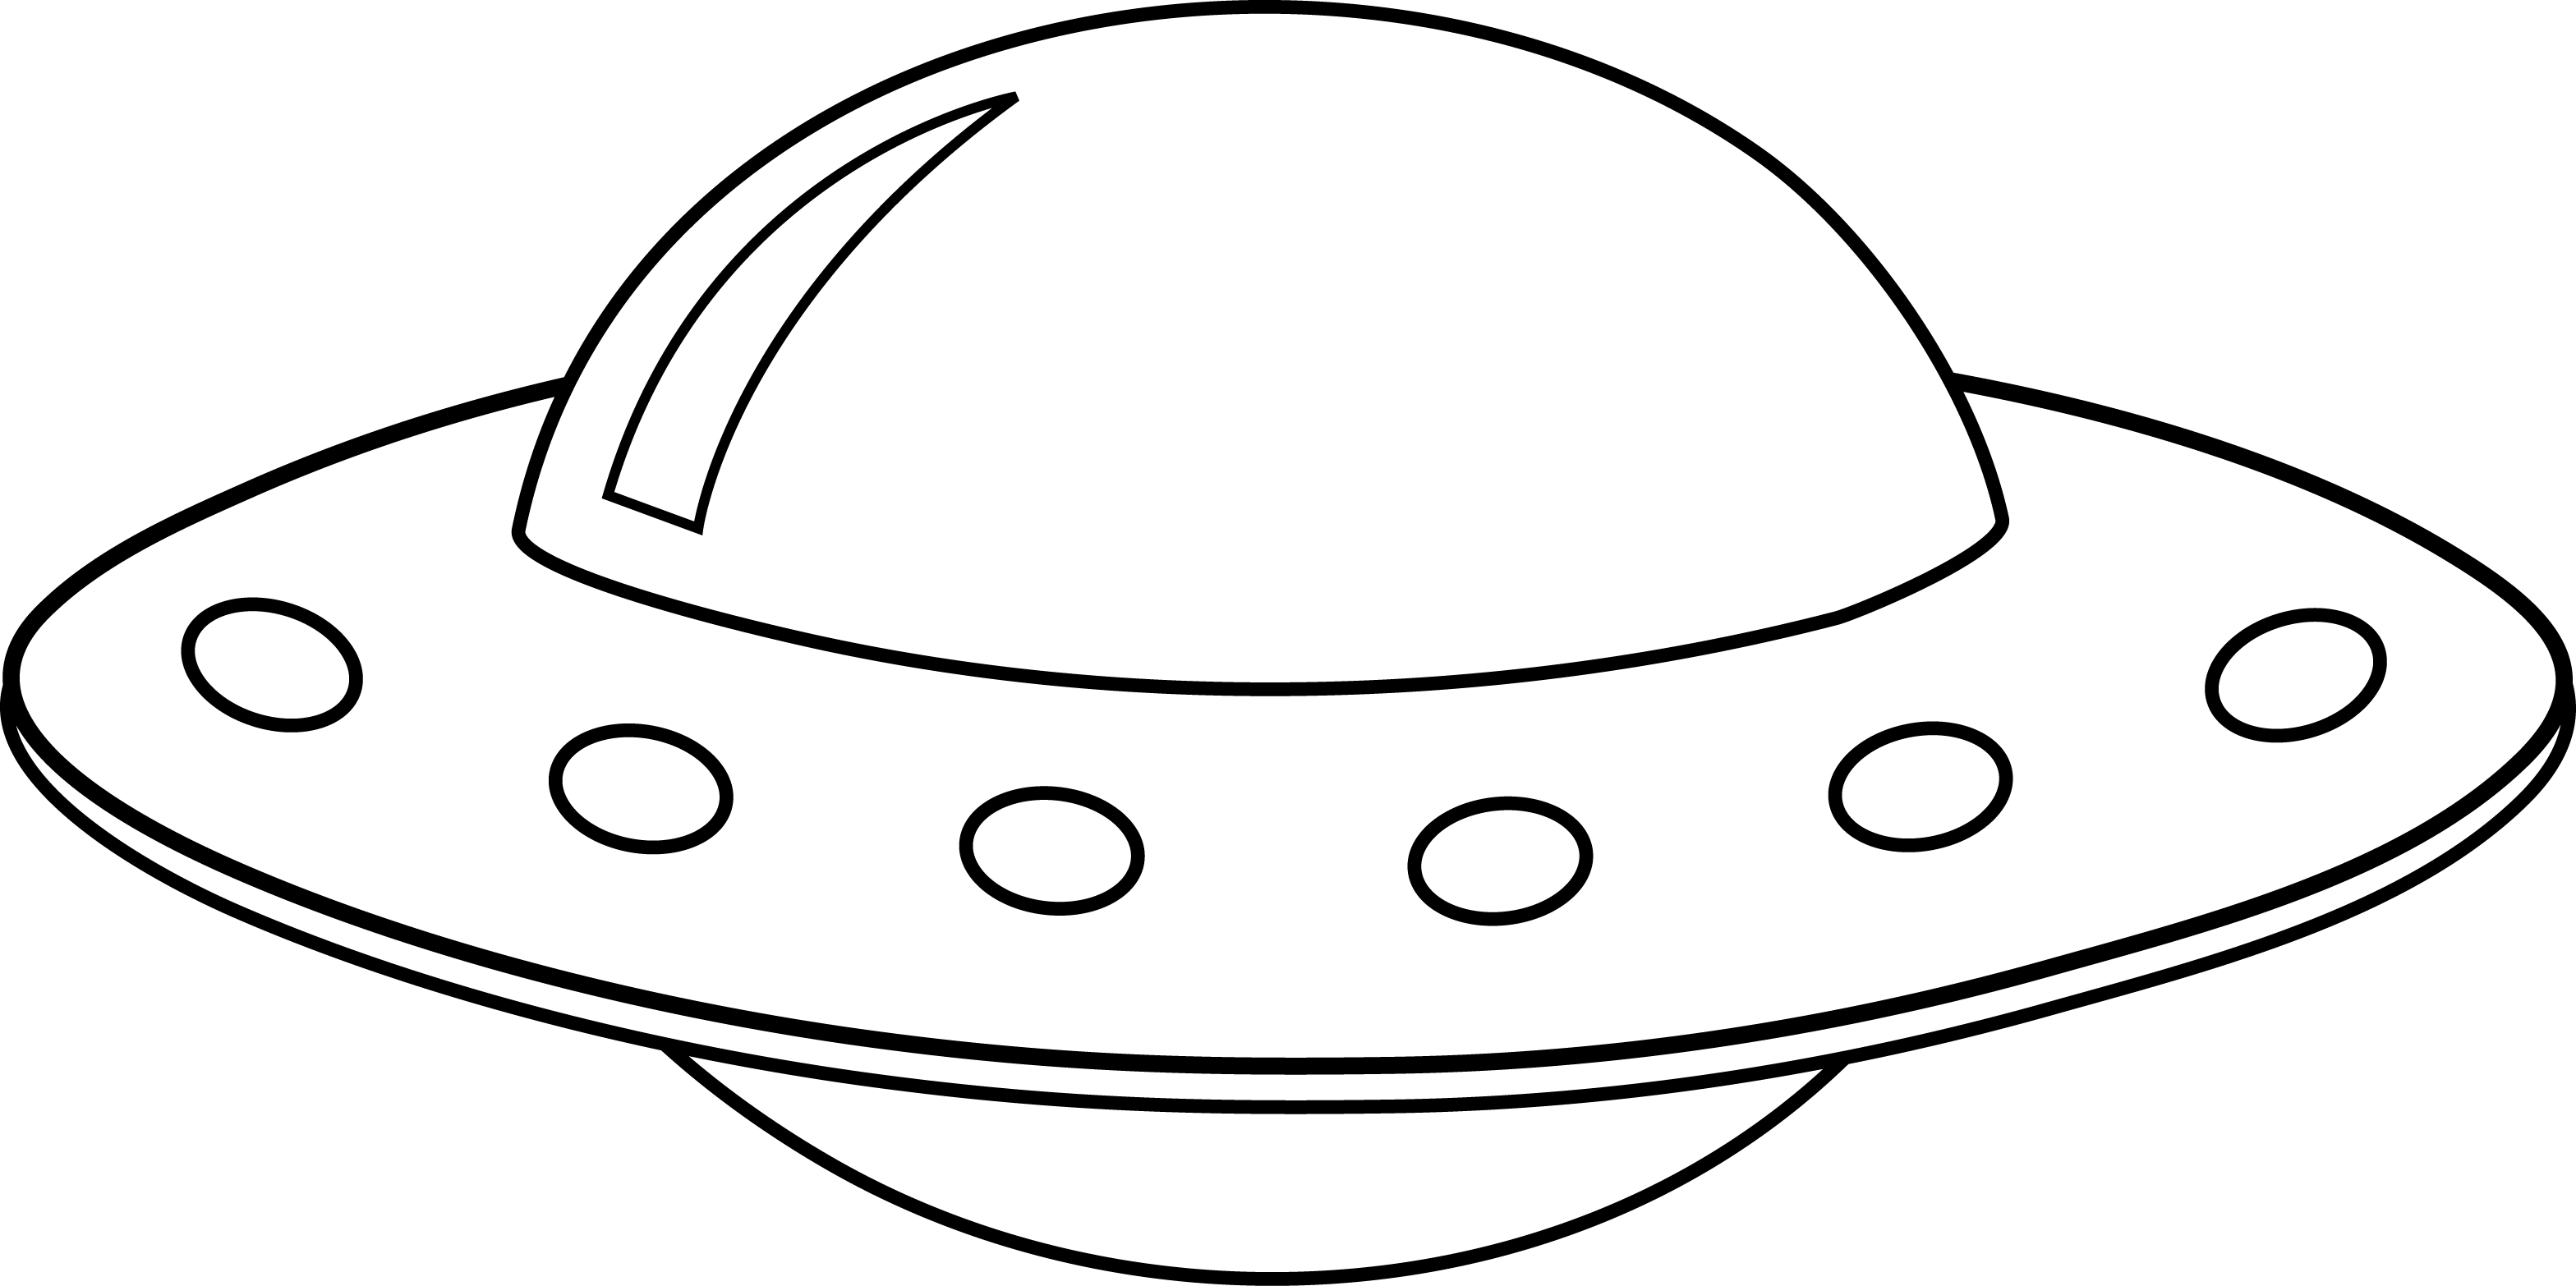 Flying saucer clipart black and white